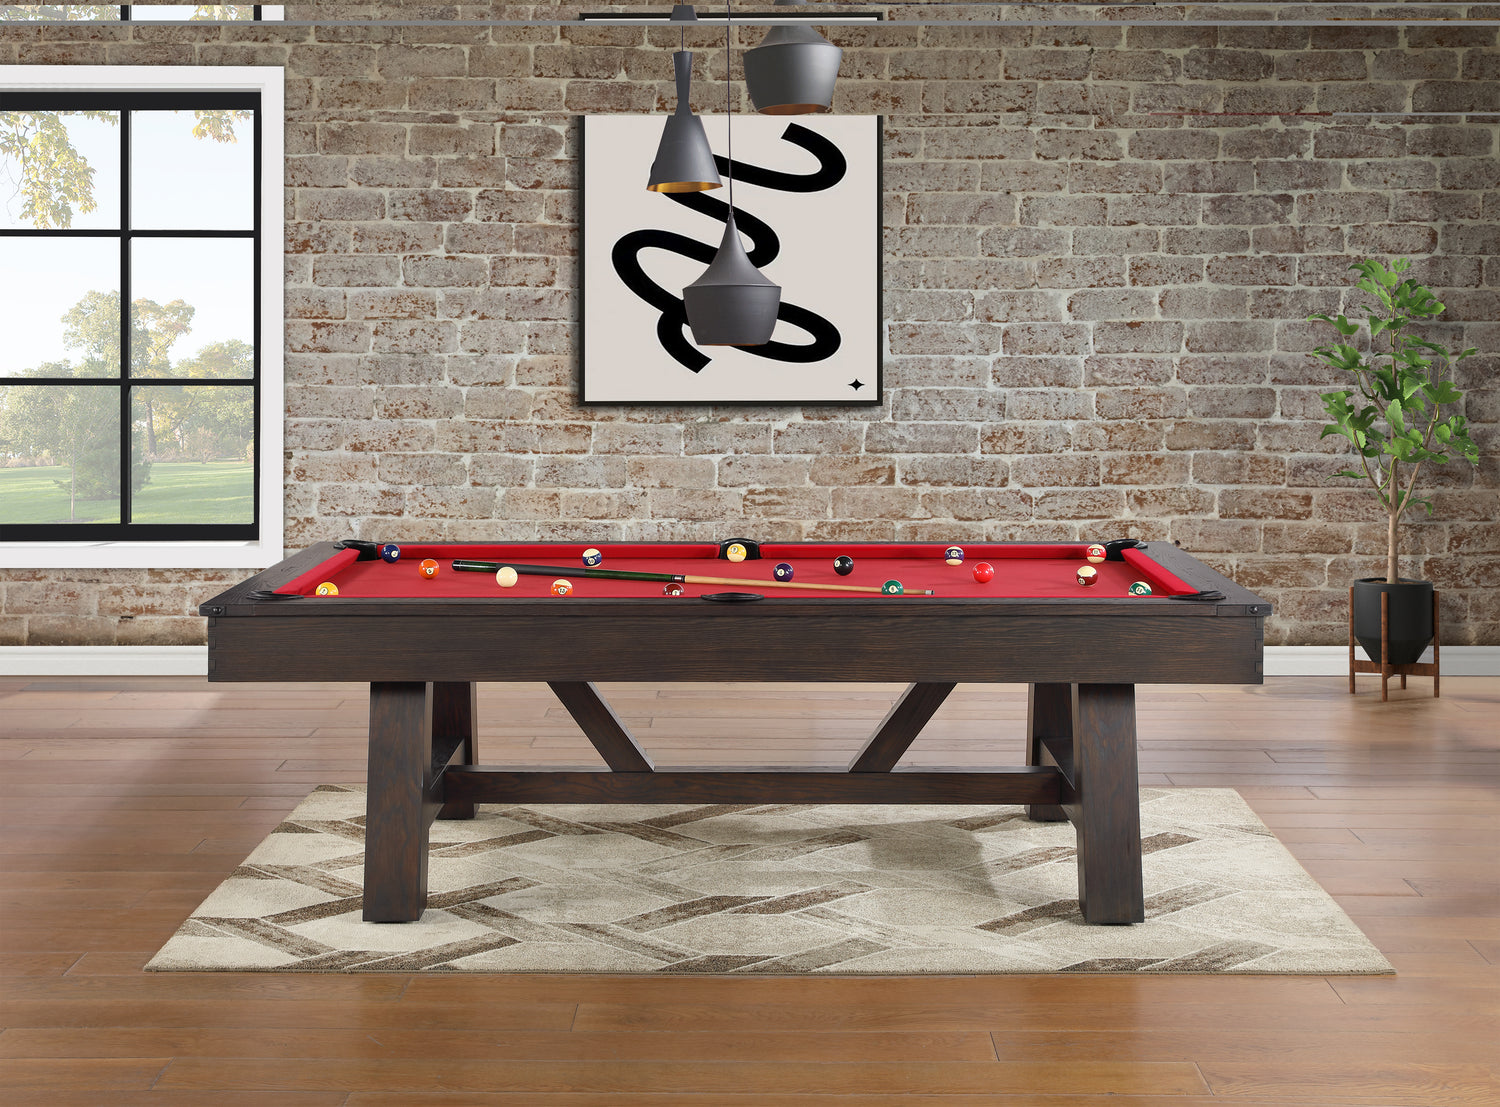 Legacy Billiards Emory Pool Table in Whiskey Barrel Finish Room Scene - Side View with Pool Balls